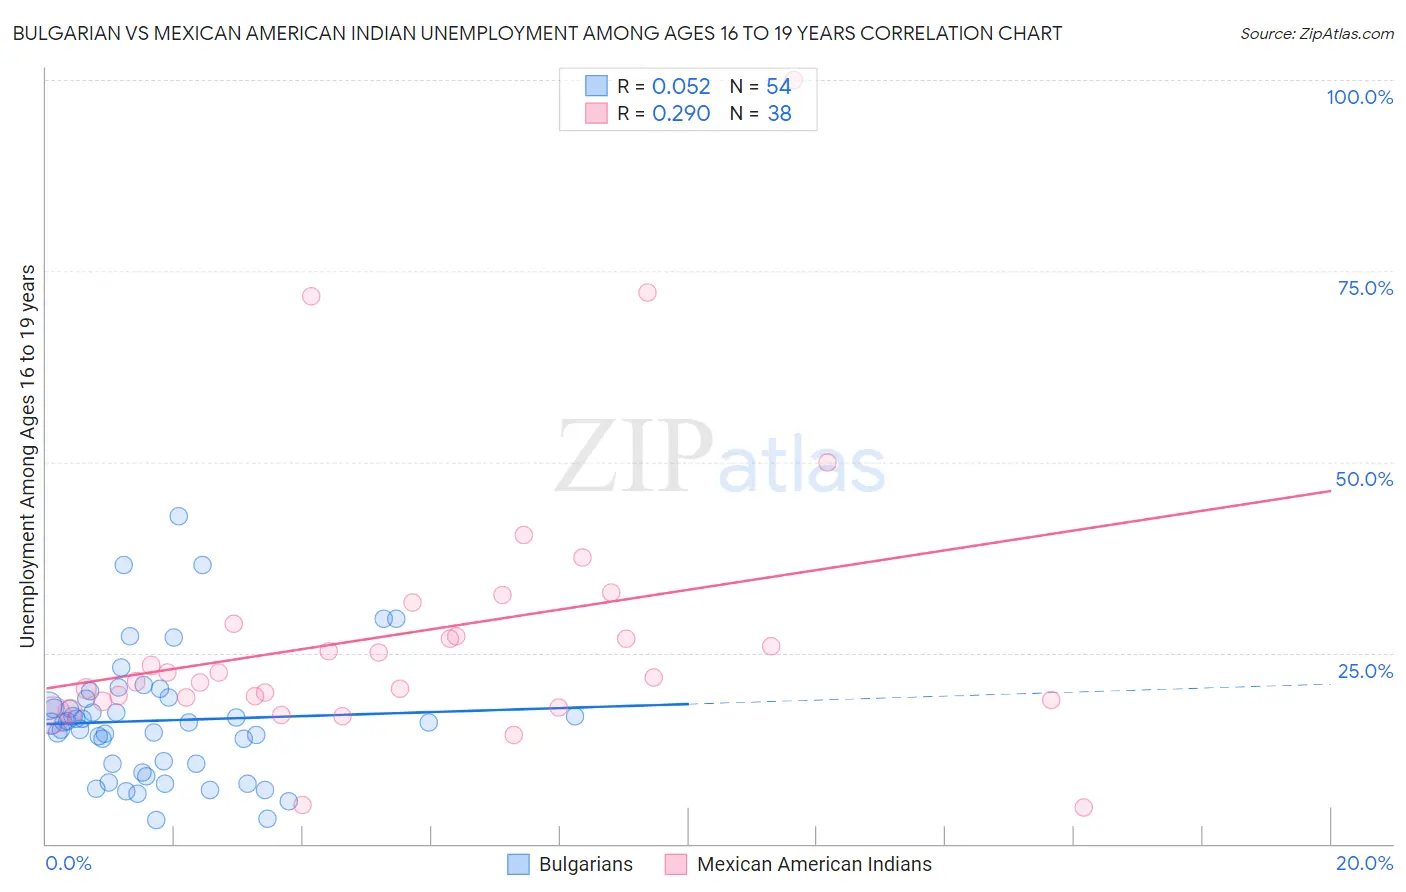 Bulgarian vs Mexican American Indian Unemployment Among Ages 16 to 19 years